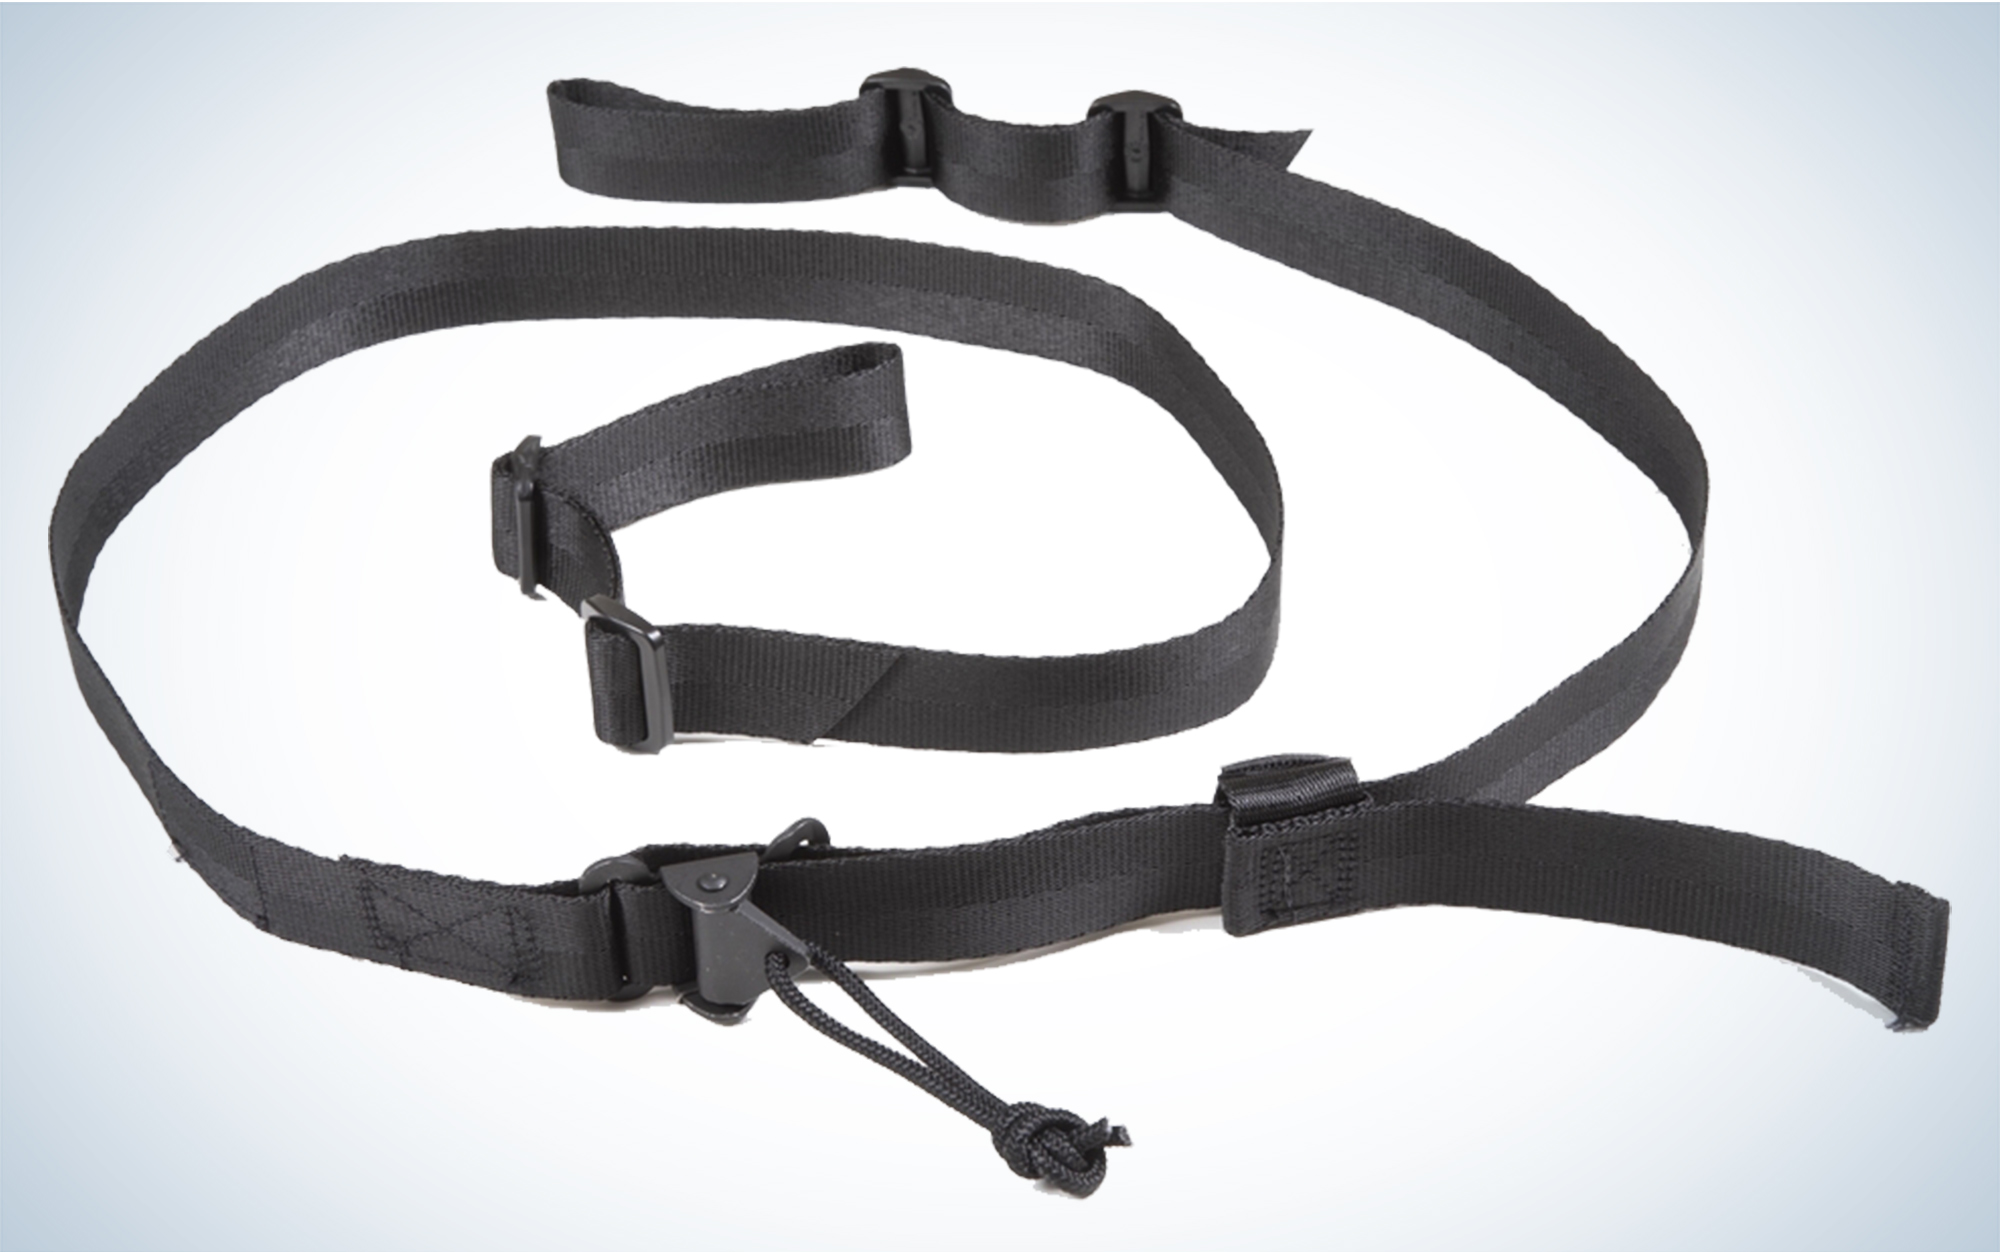 2 Point Padded Sling  Two Point Tactical Sling